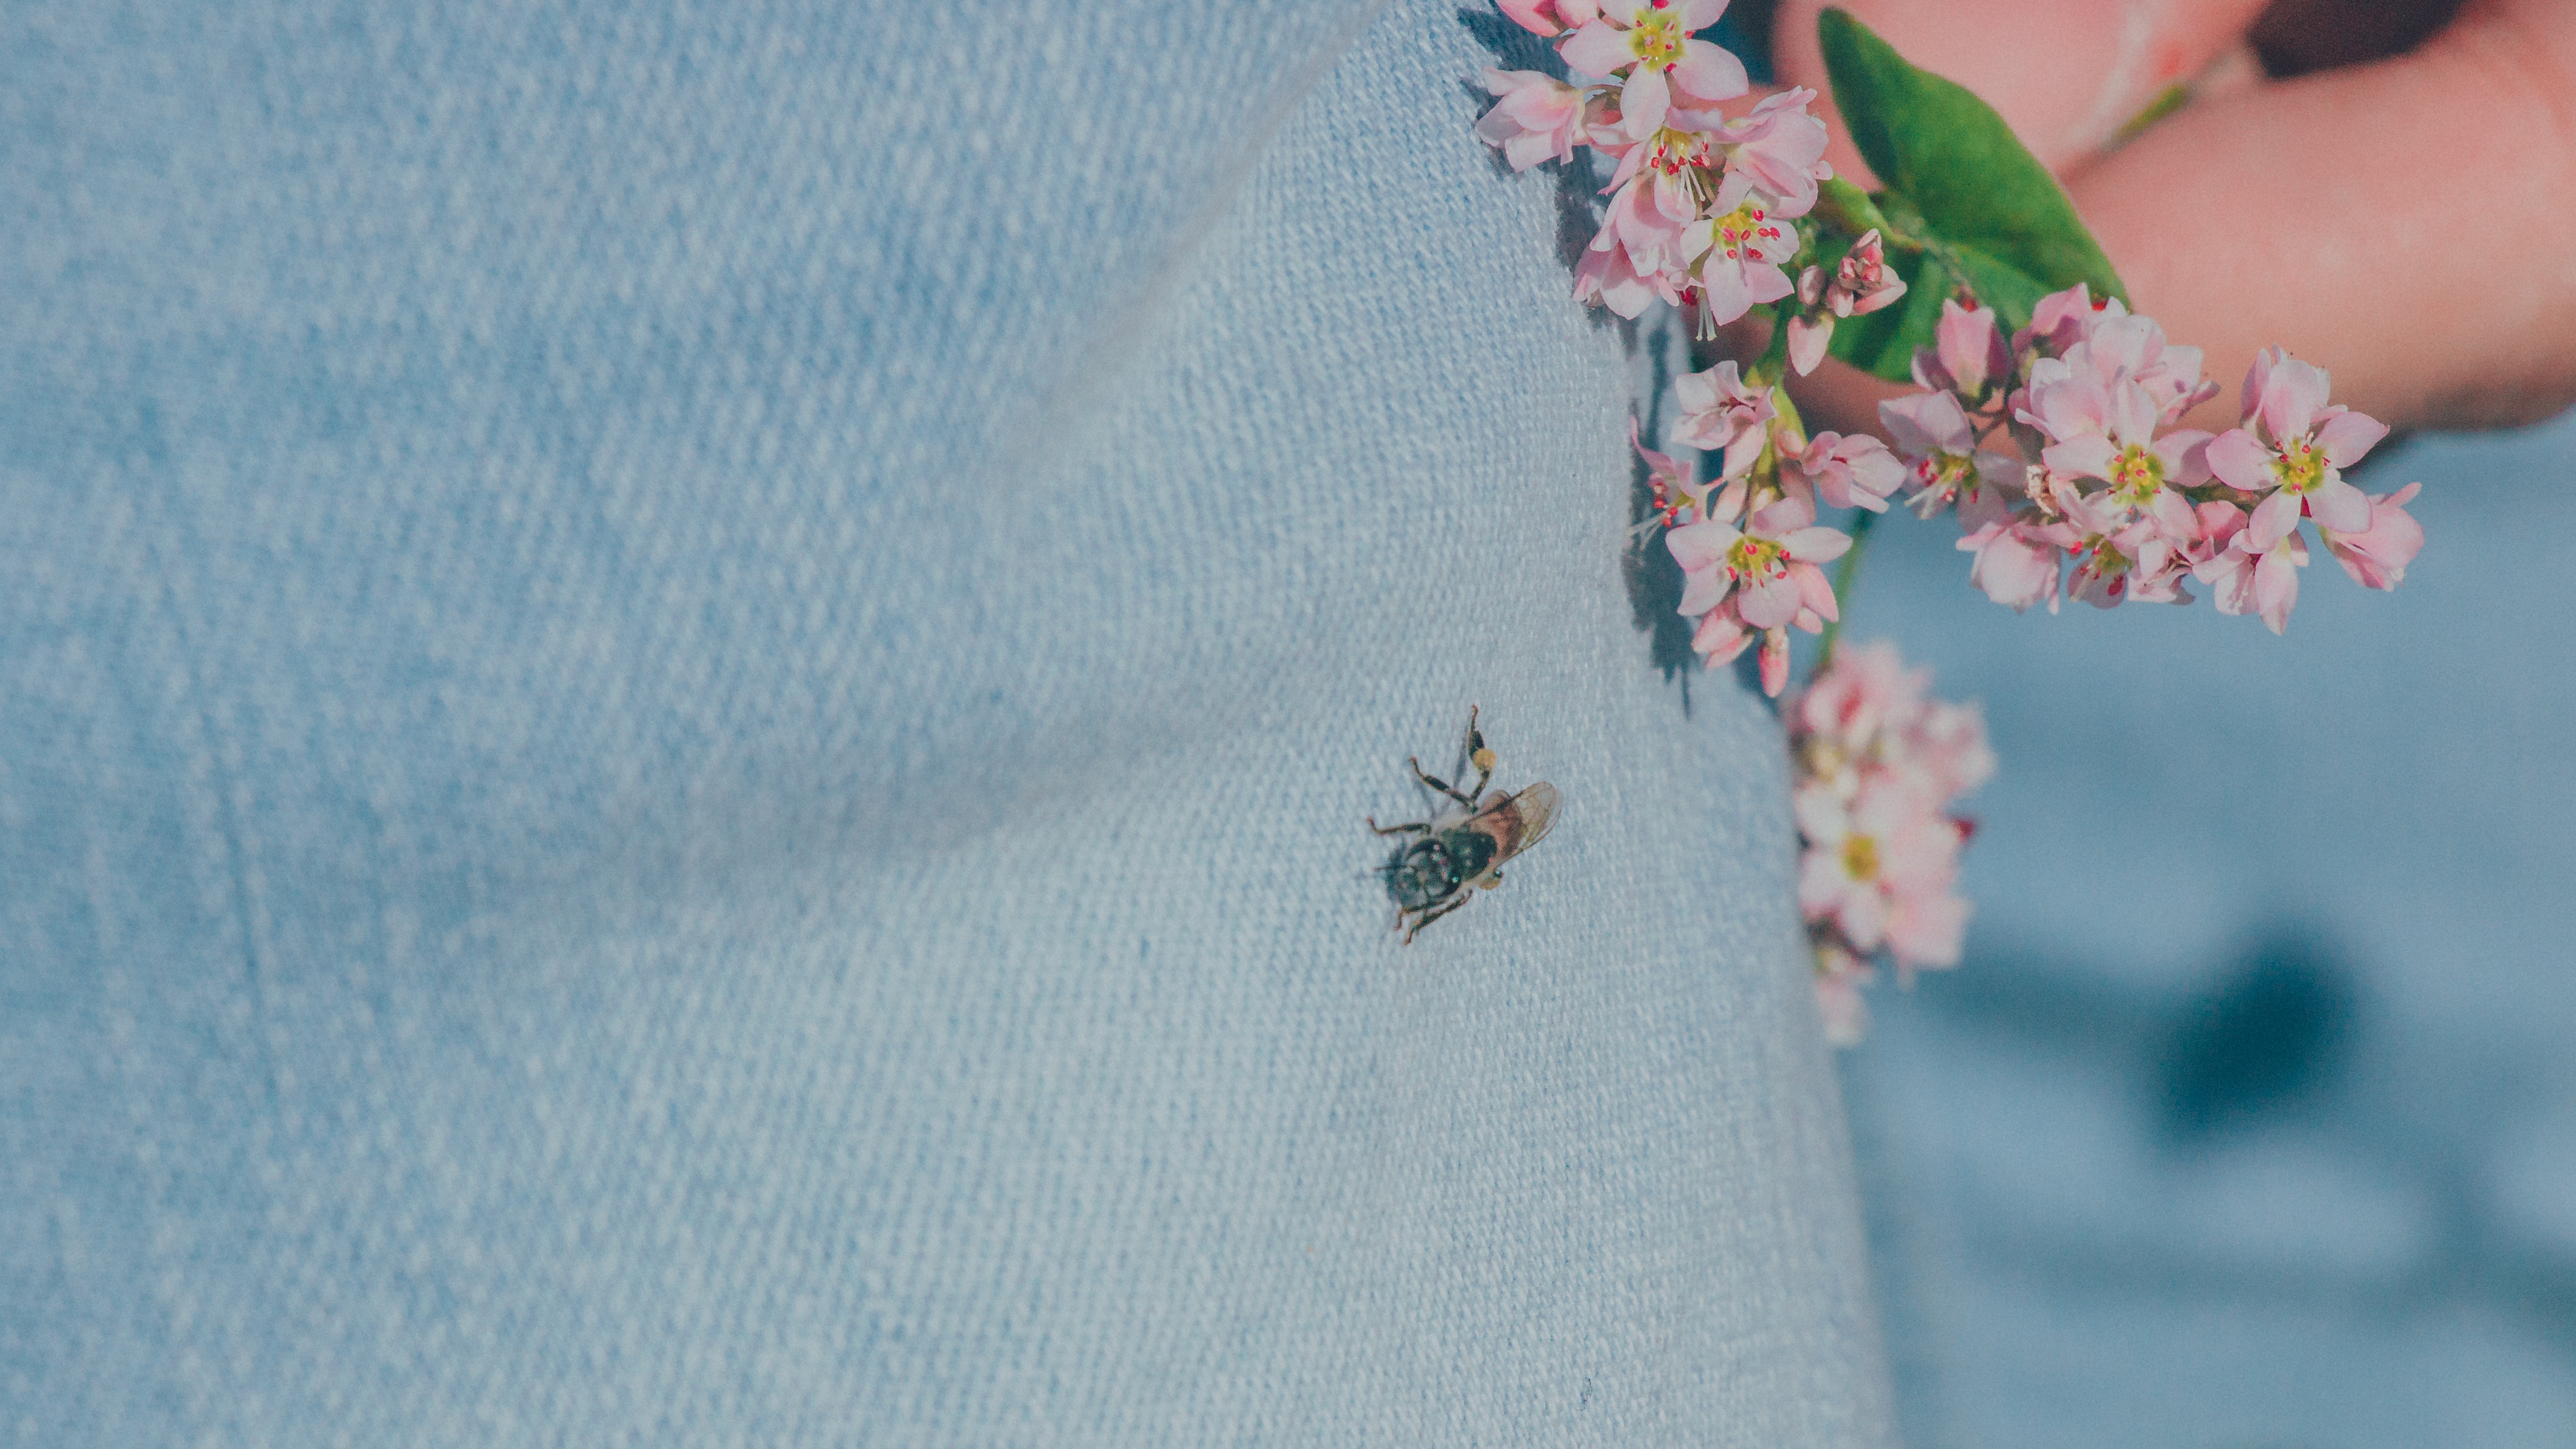 Black housefly on person's jeans photo